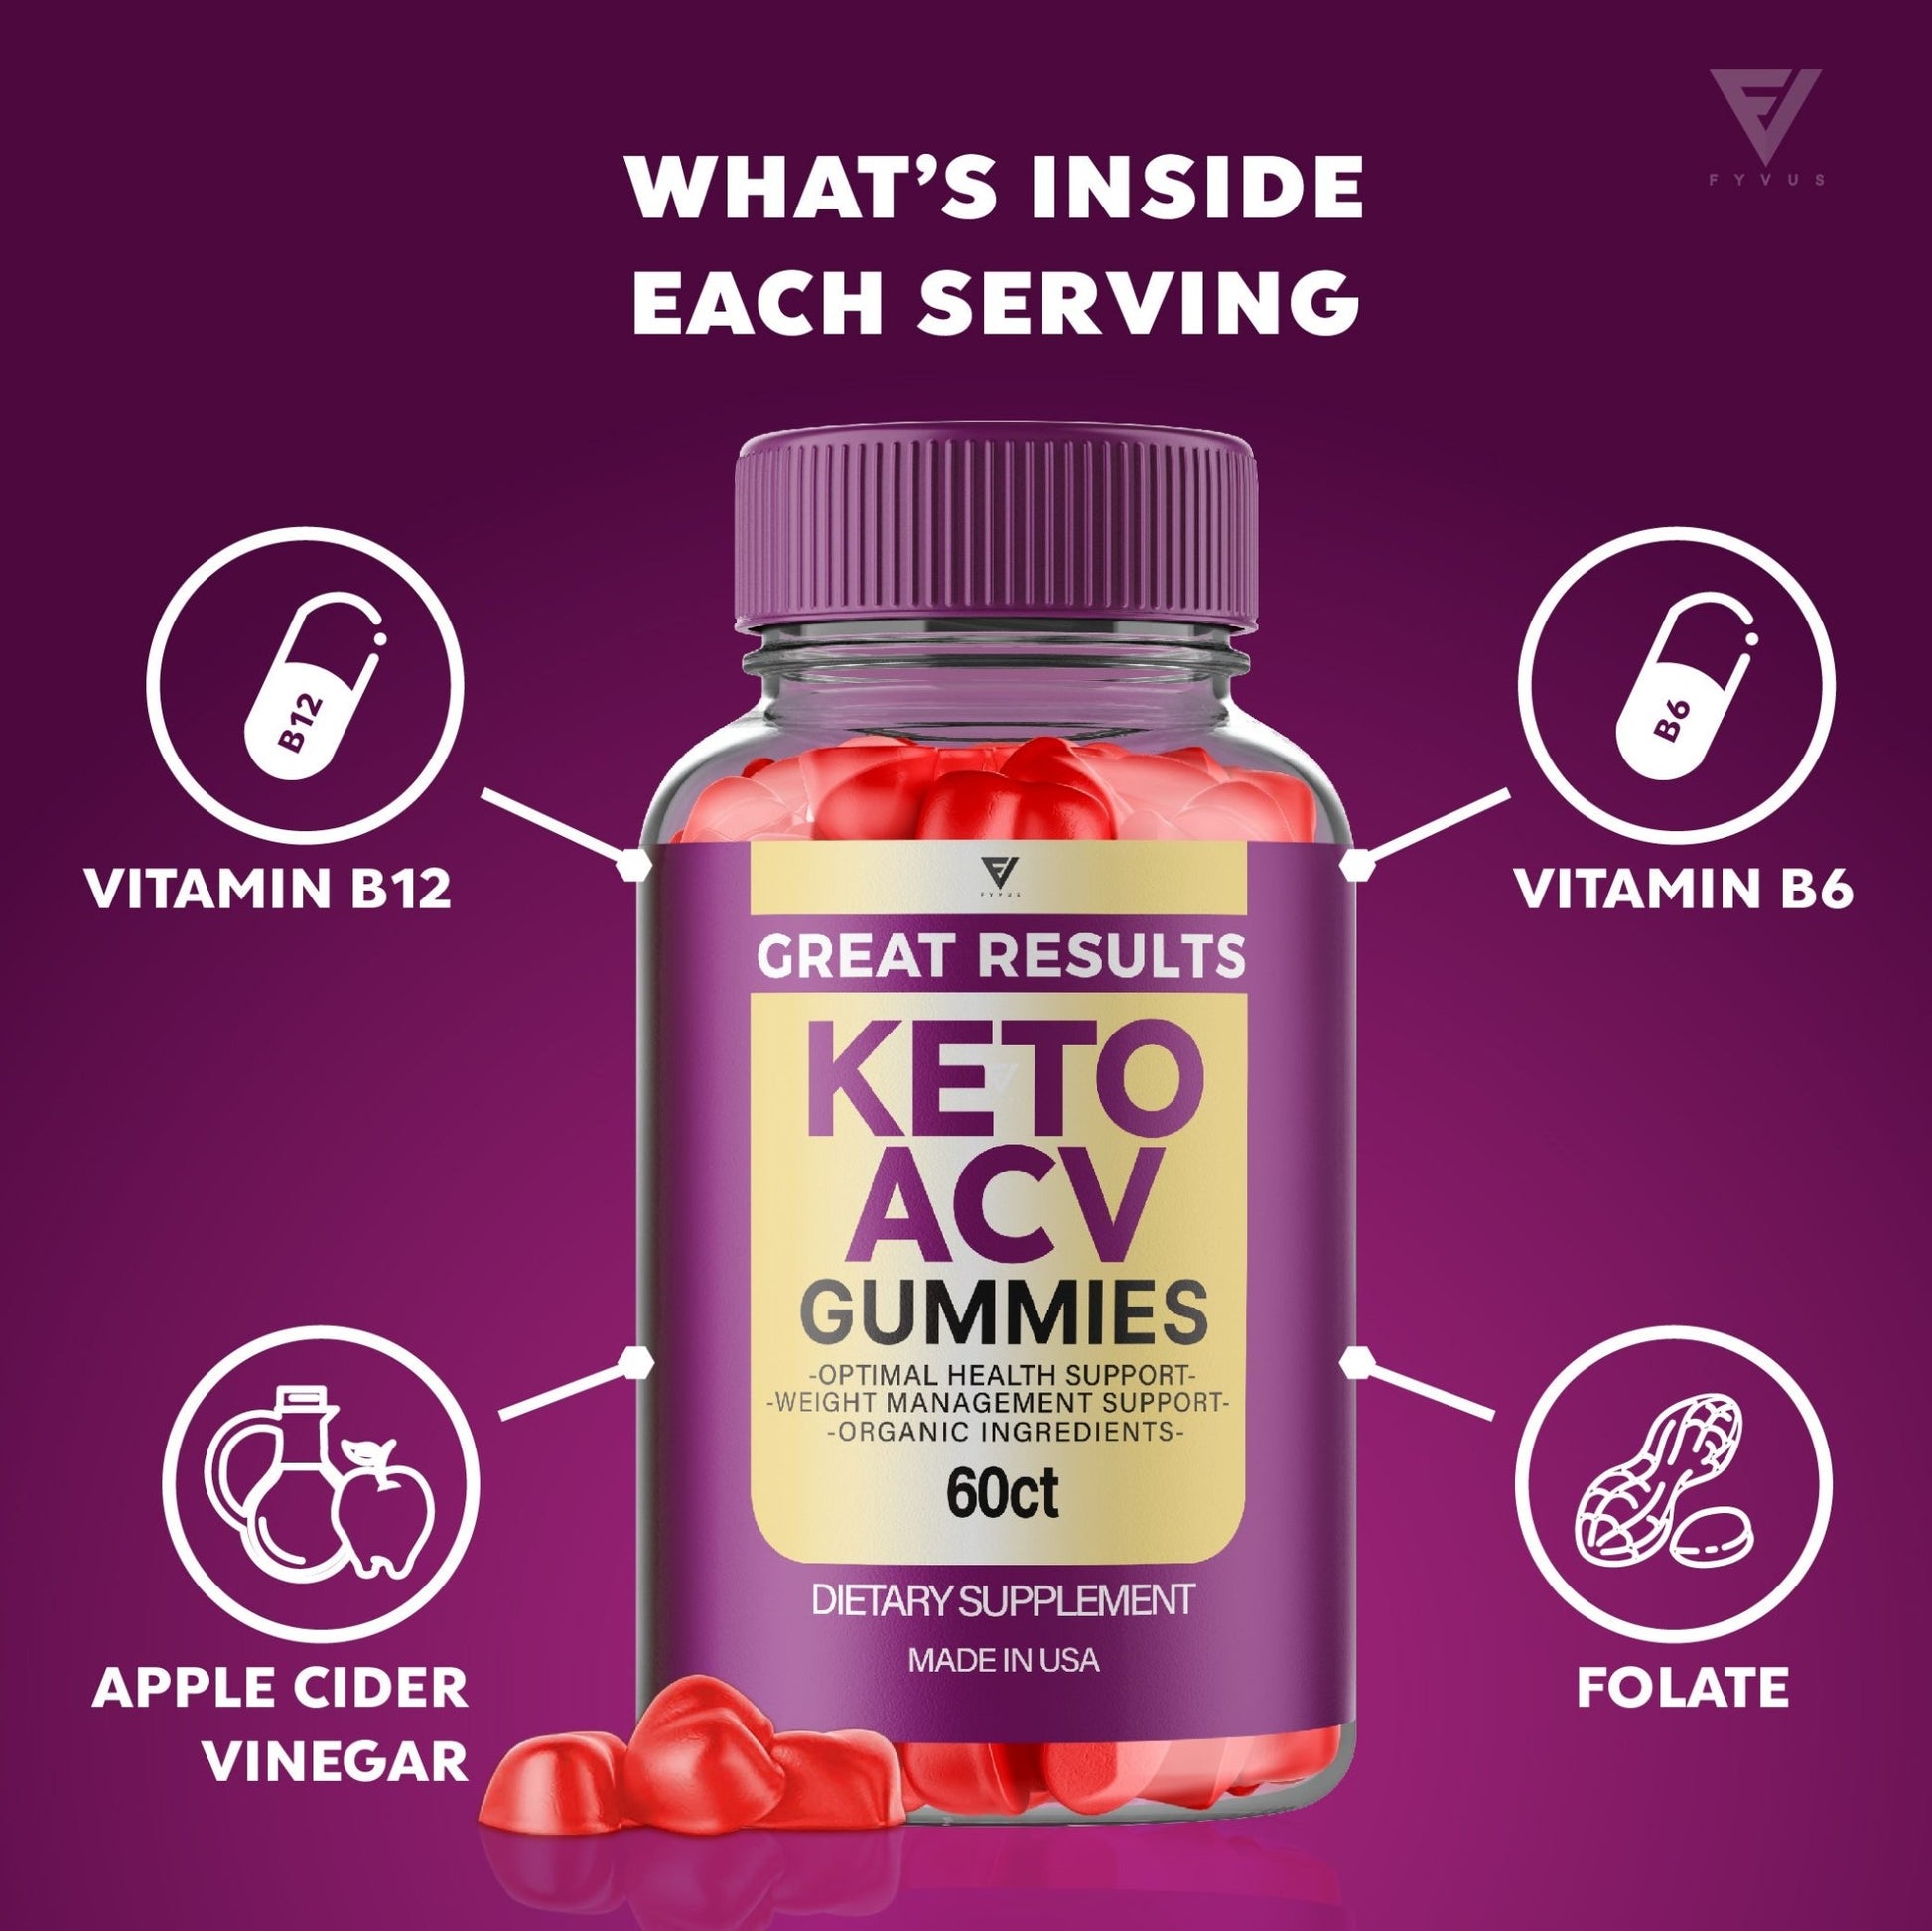 Great Results Keto ACV Gummies - Vitamin Place